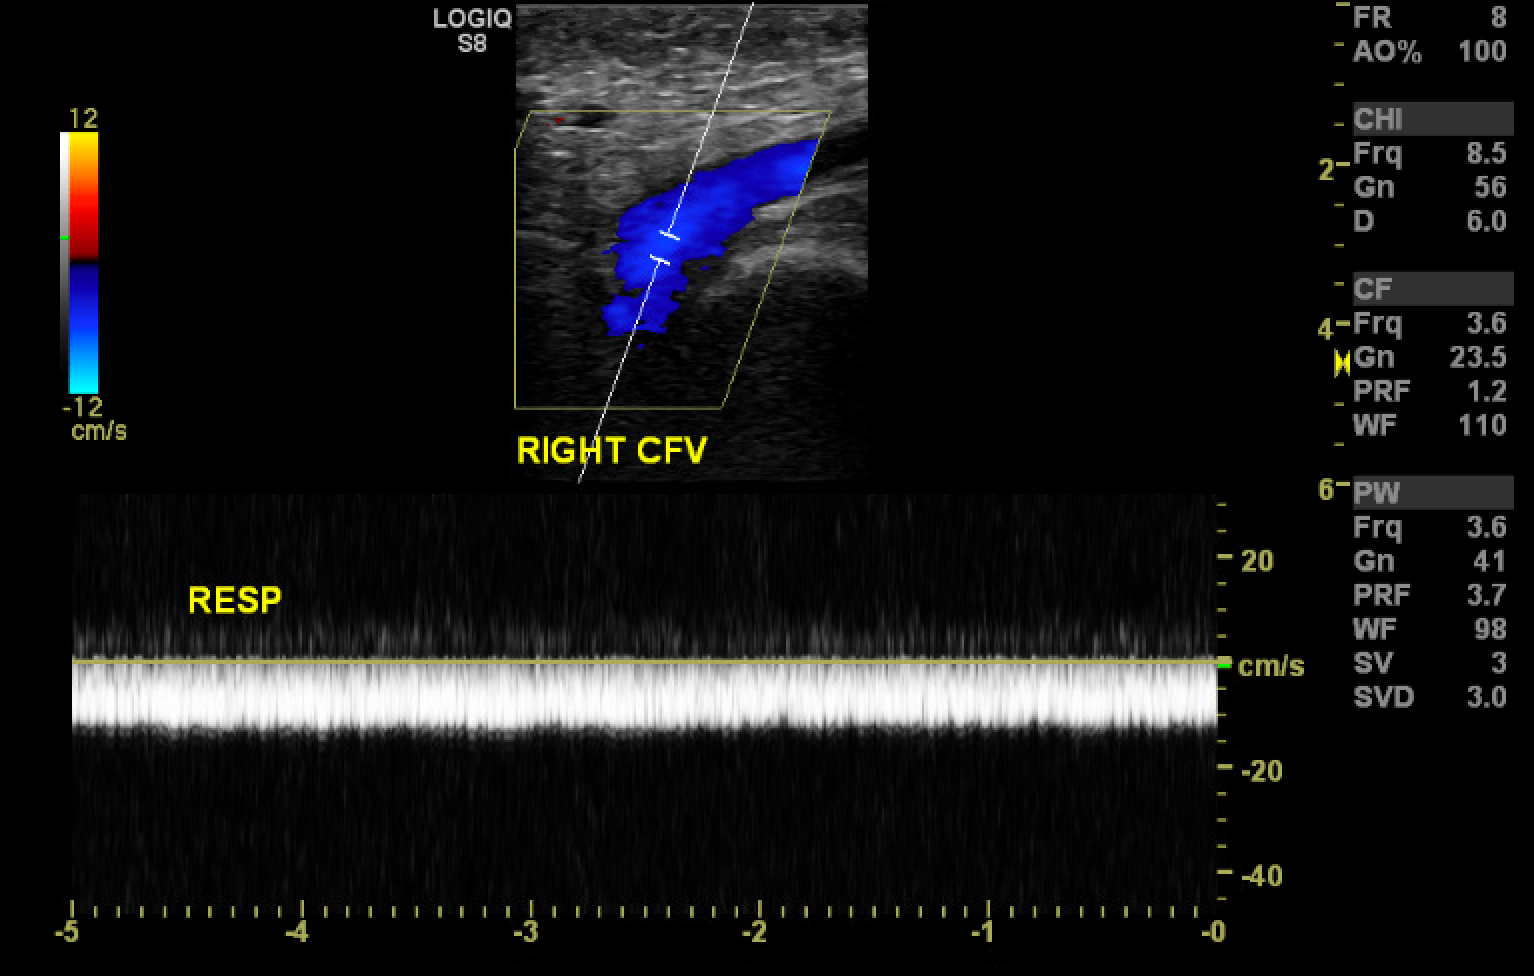 Loss of phasicity in the common femoral vein.